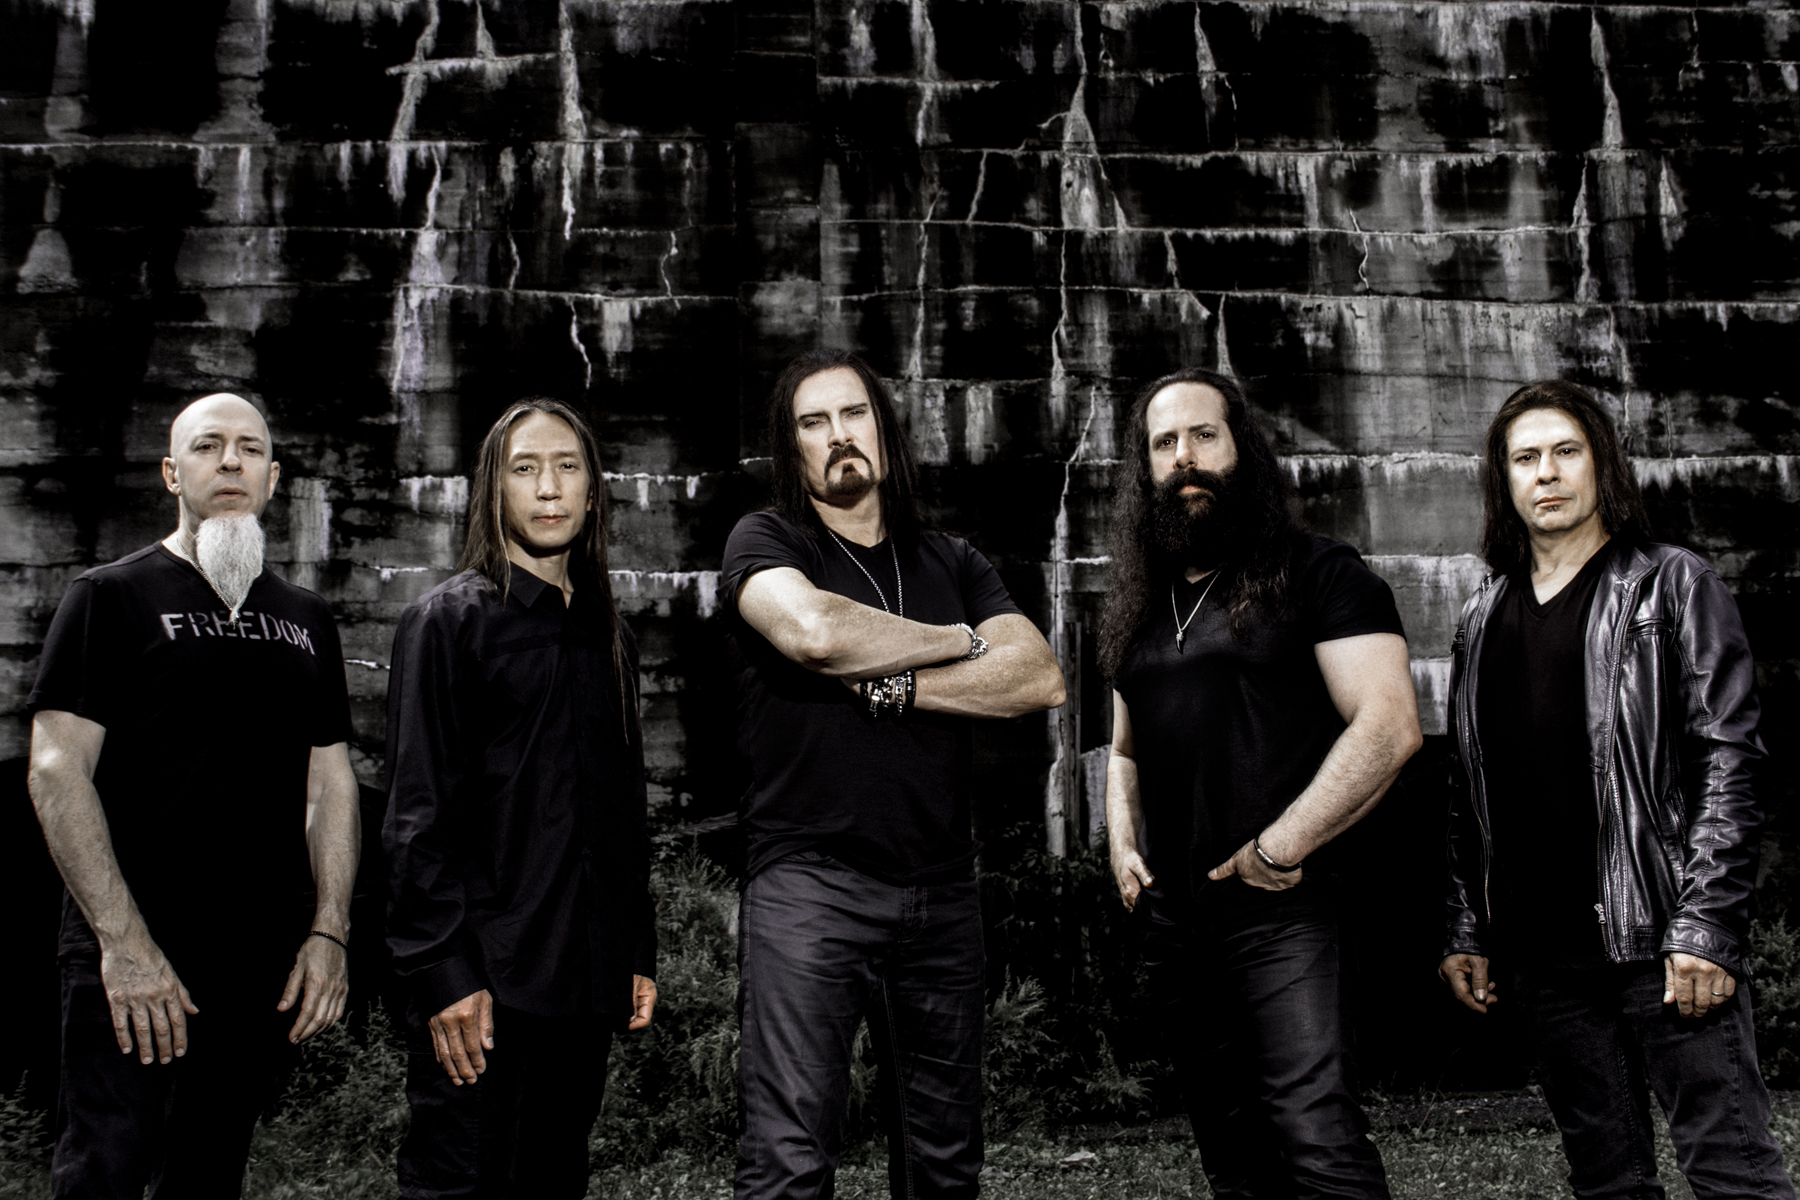 Vezi trupa DREAM THEATER Performand 'The Spirit Carries pe ' From 'Distant Memories - Live In London'